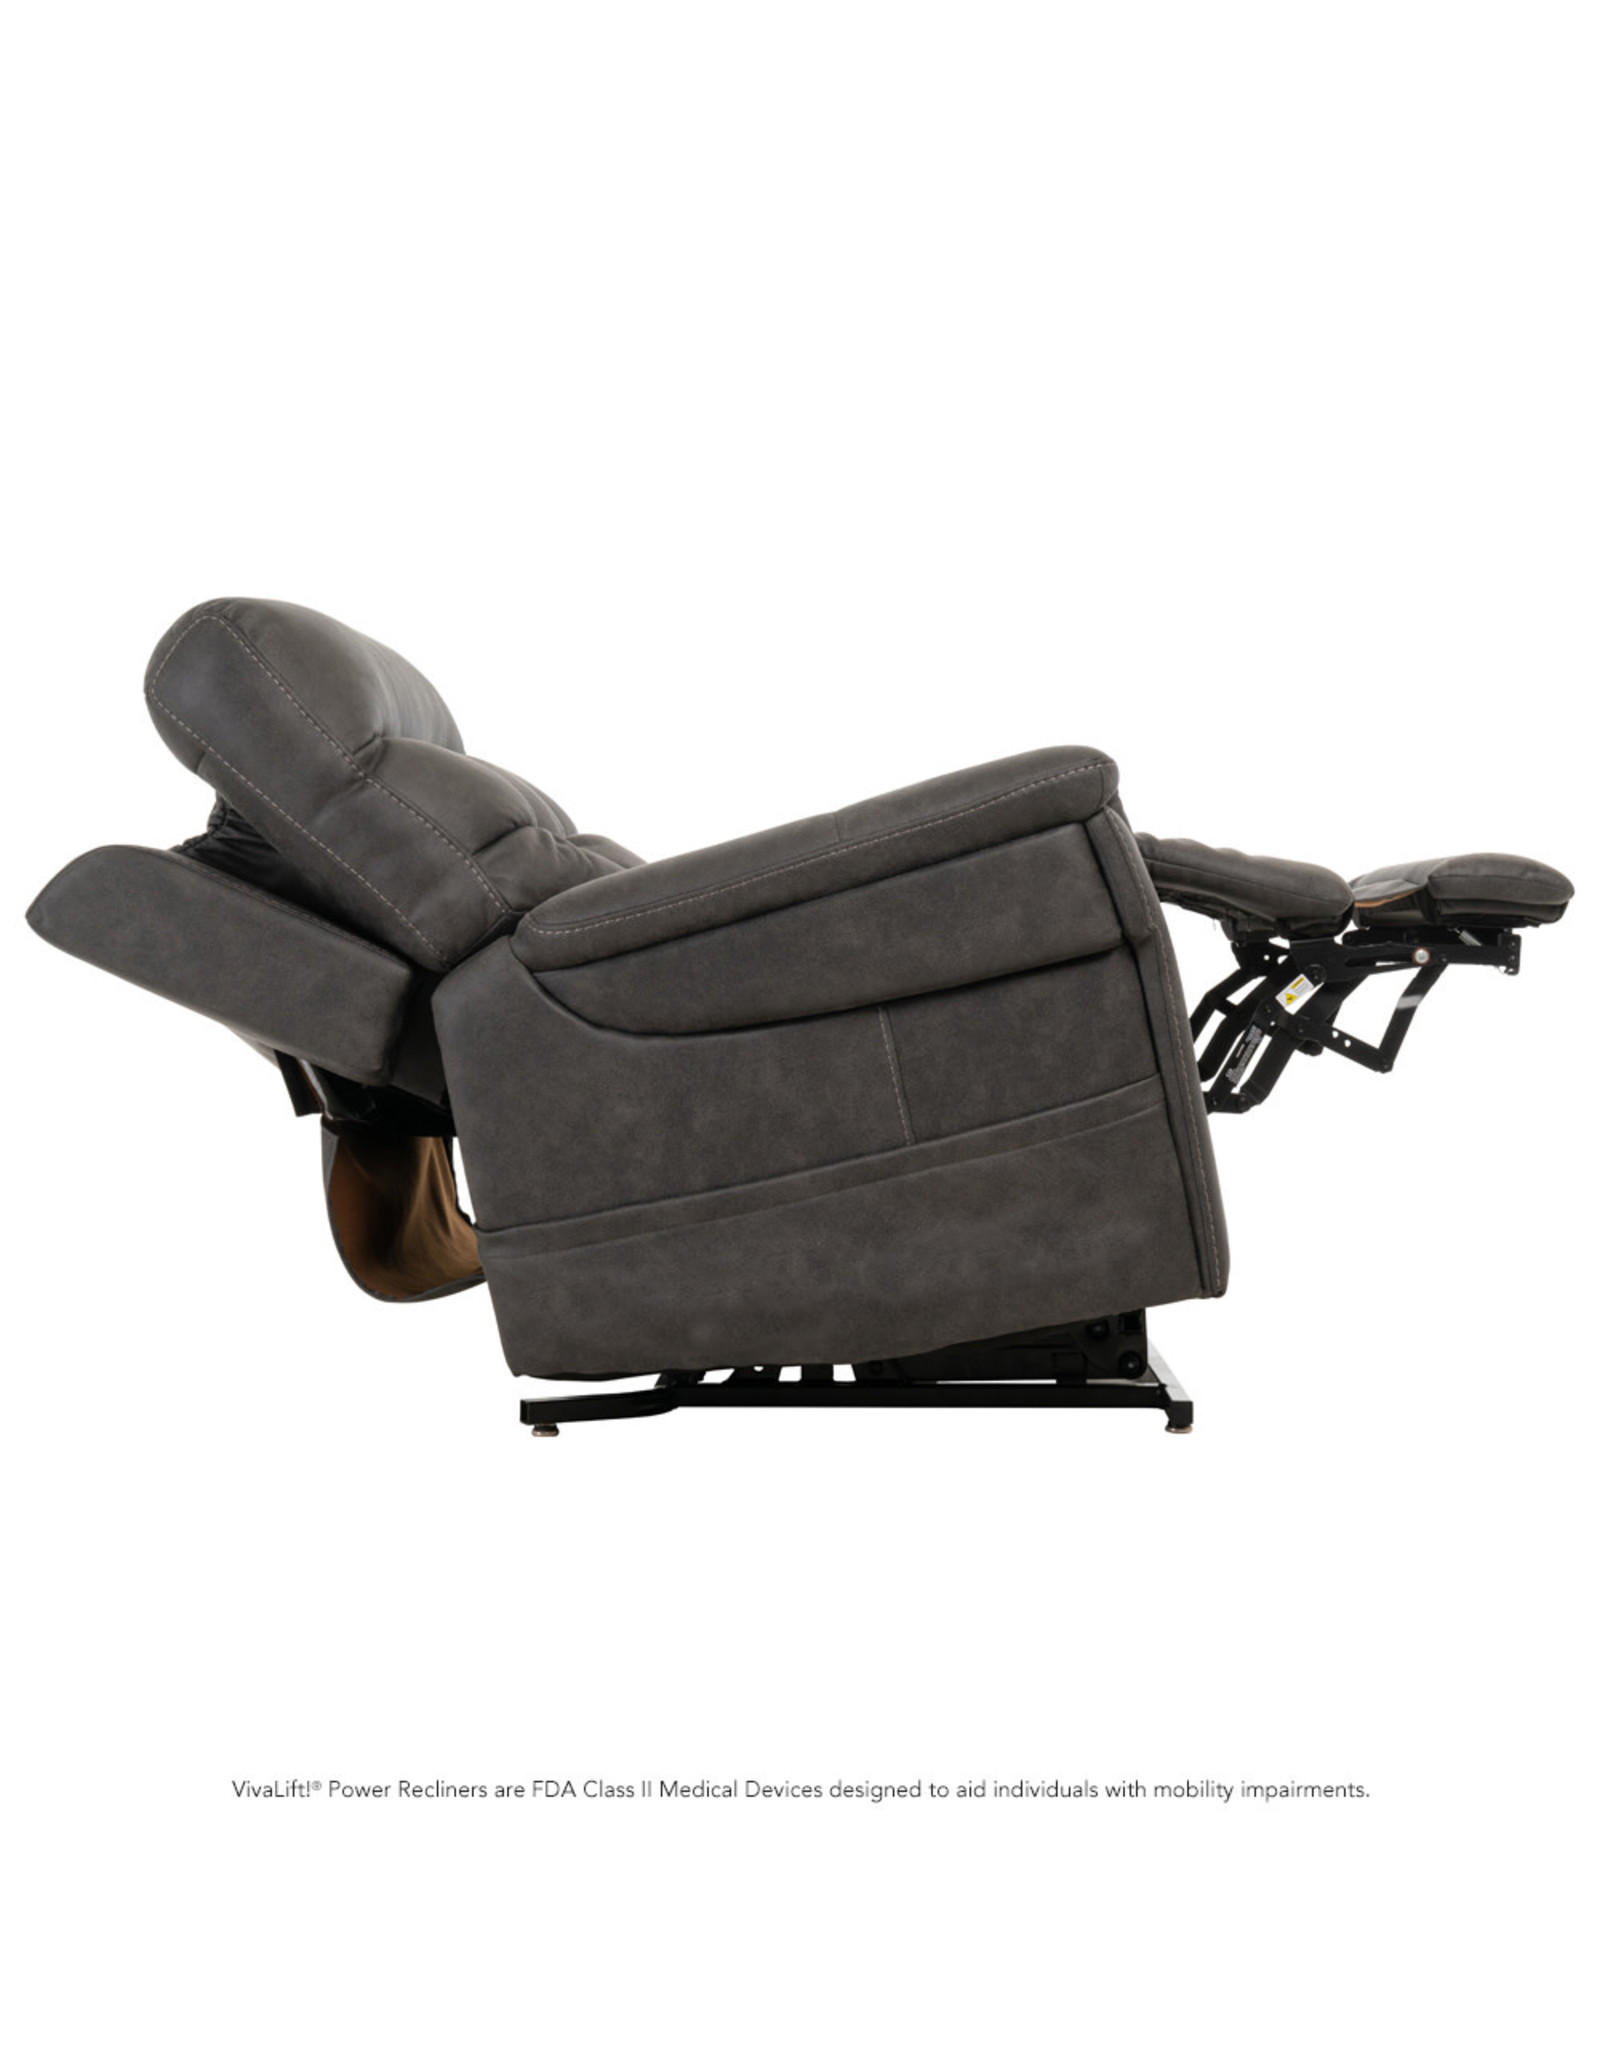 Pride Lift Recliner - Radiance PLR3955S - Canyon Steel